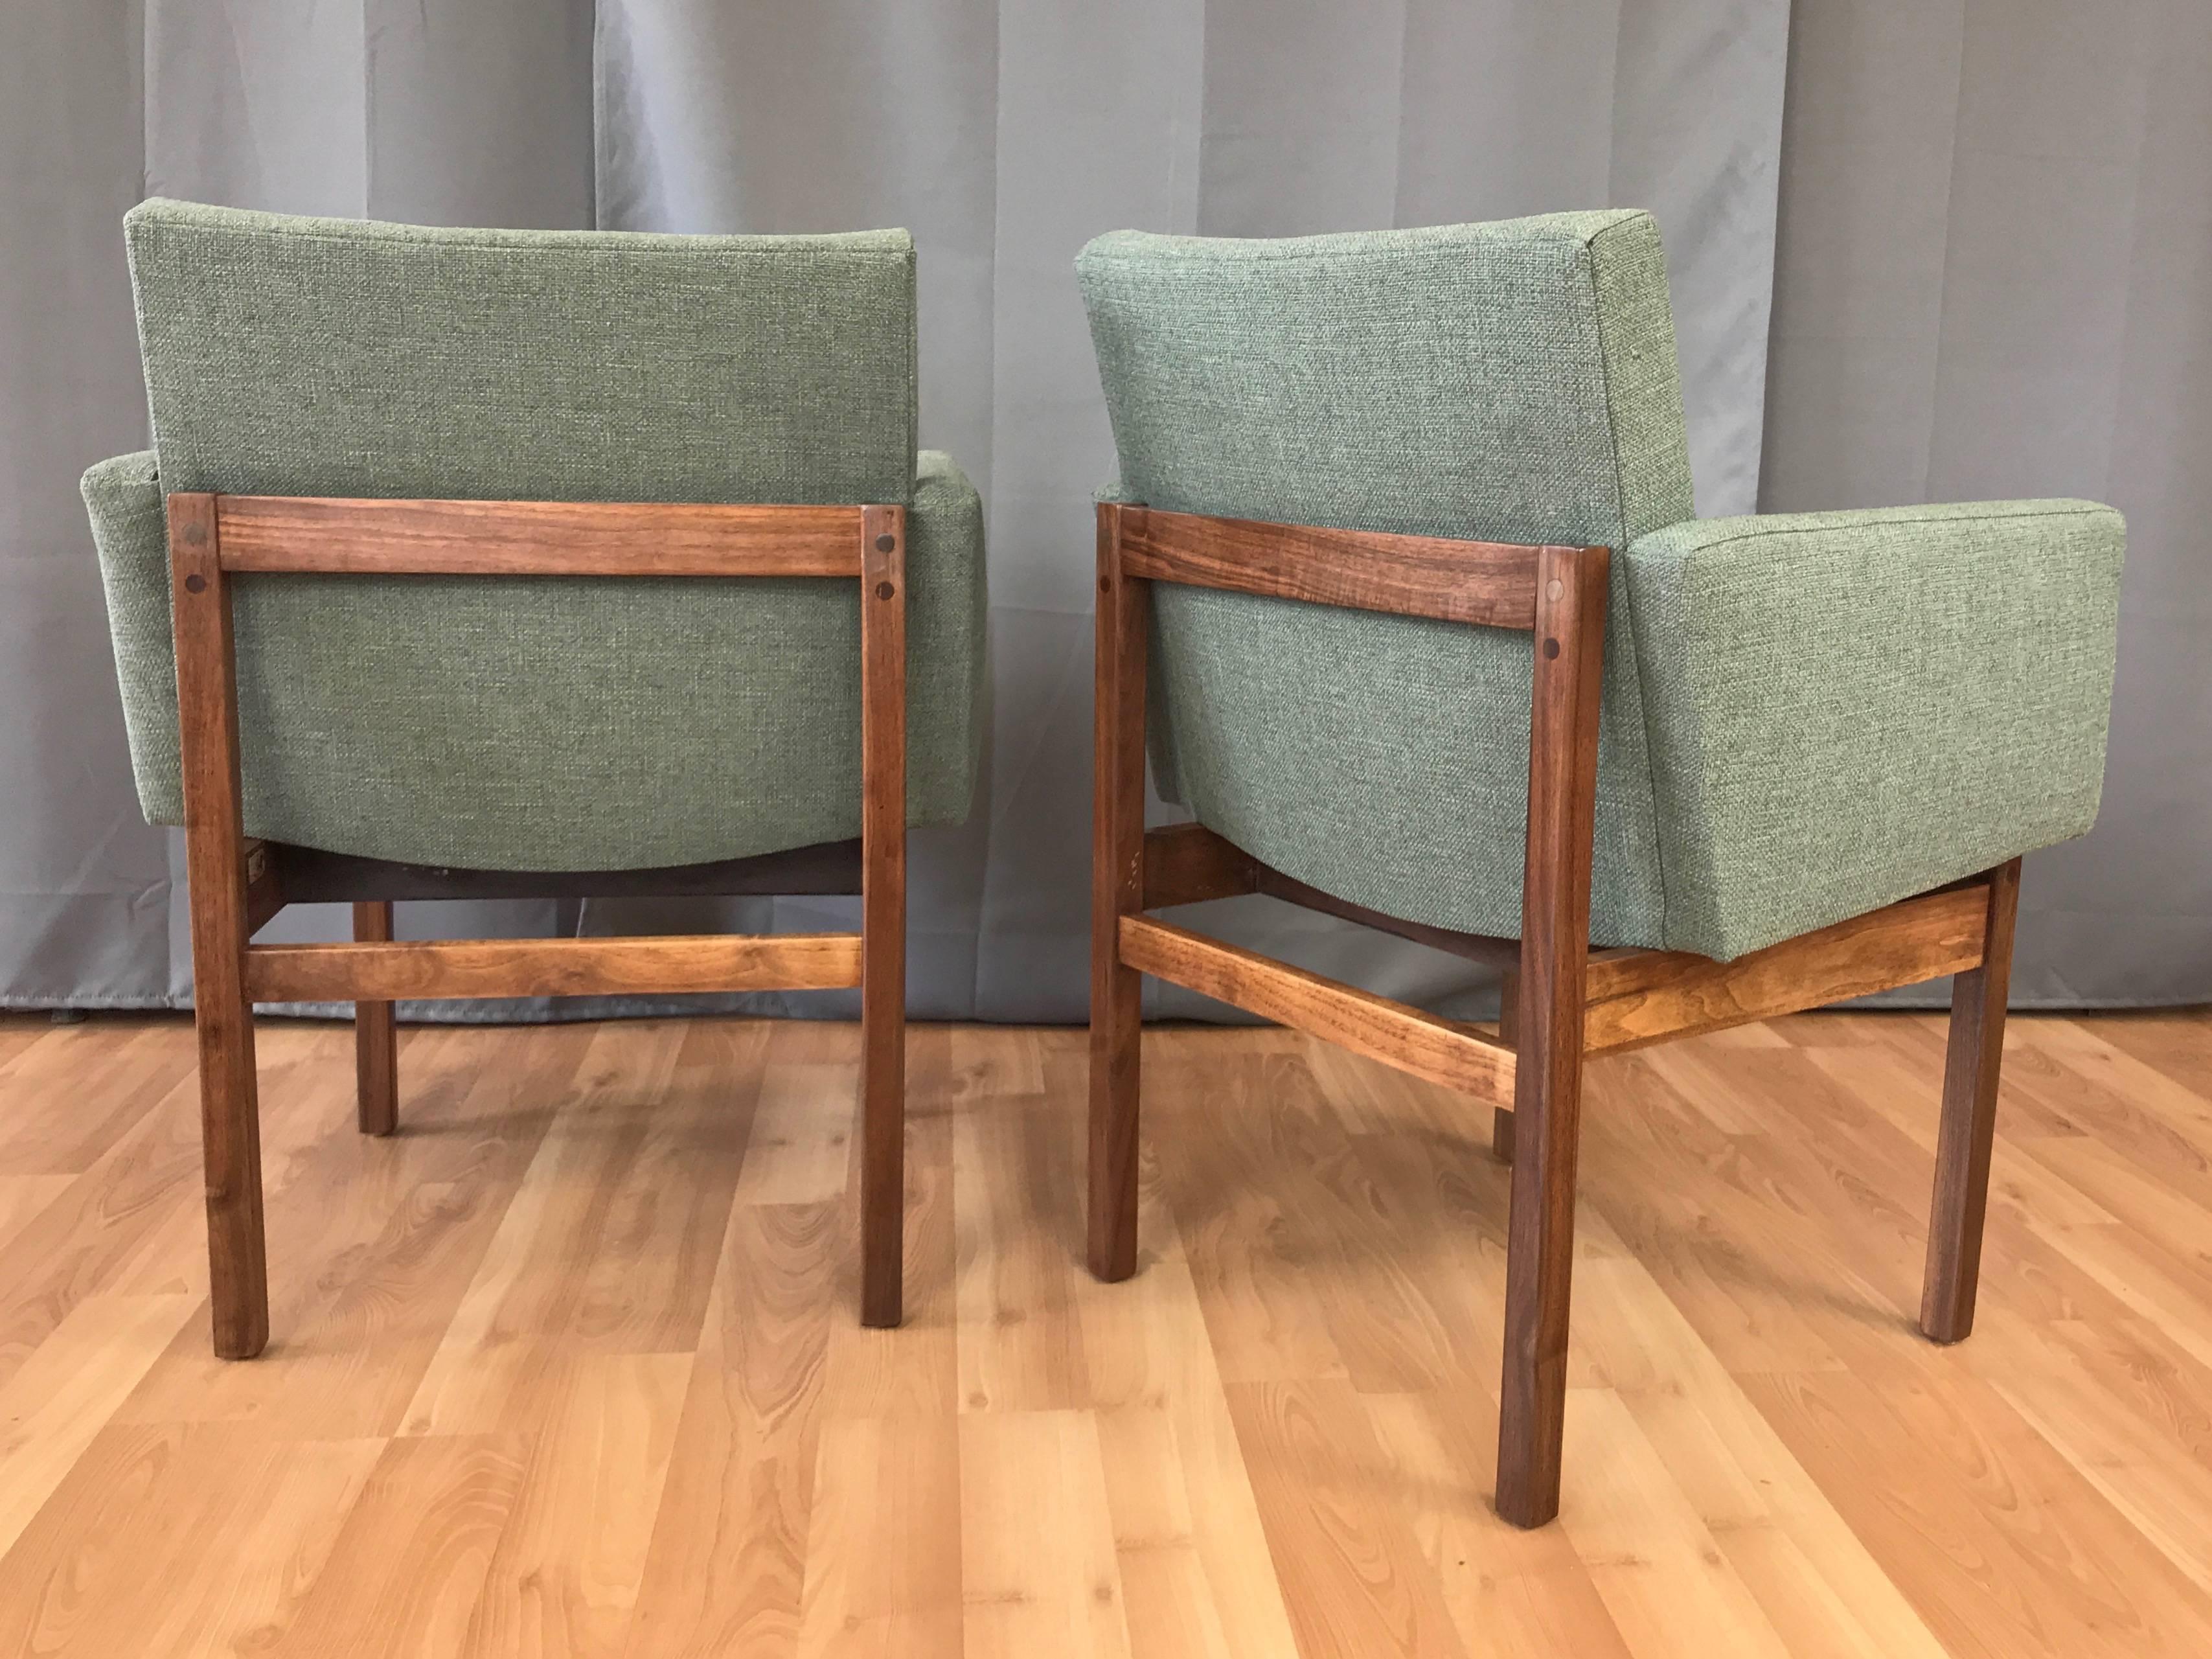 Pair of Midcentury Walnut Lounge Chairs Attributed to Jens Risom 1